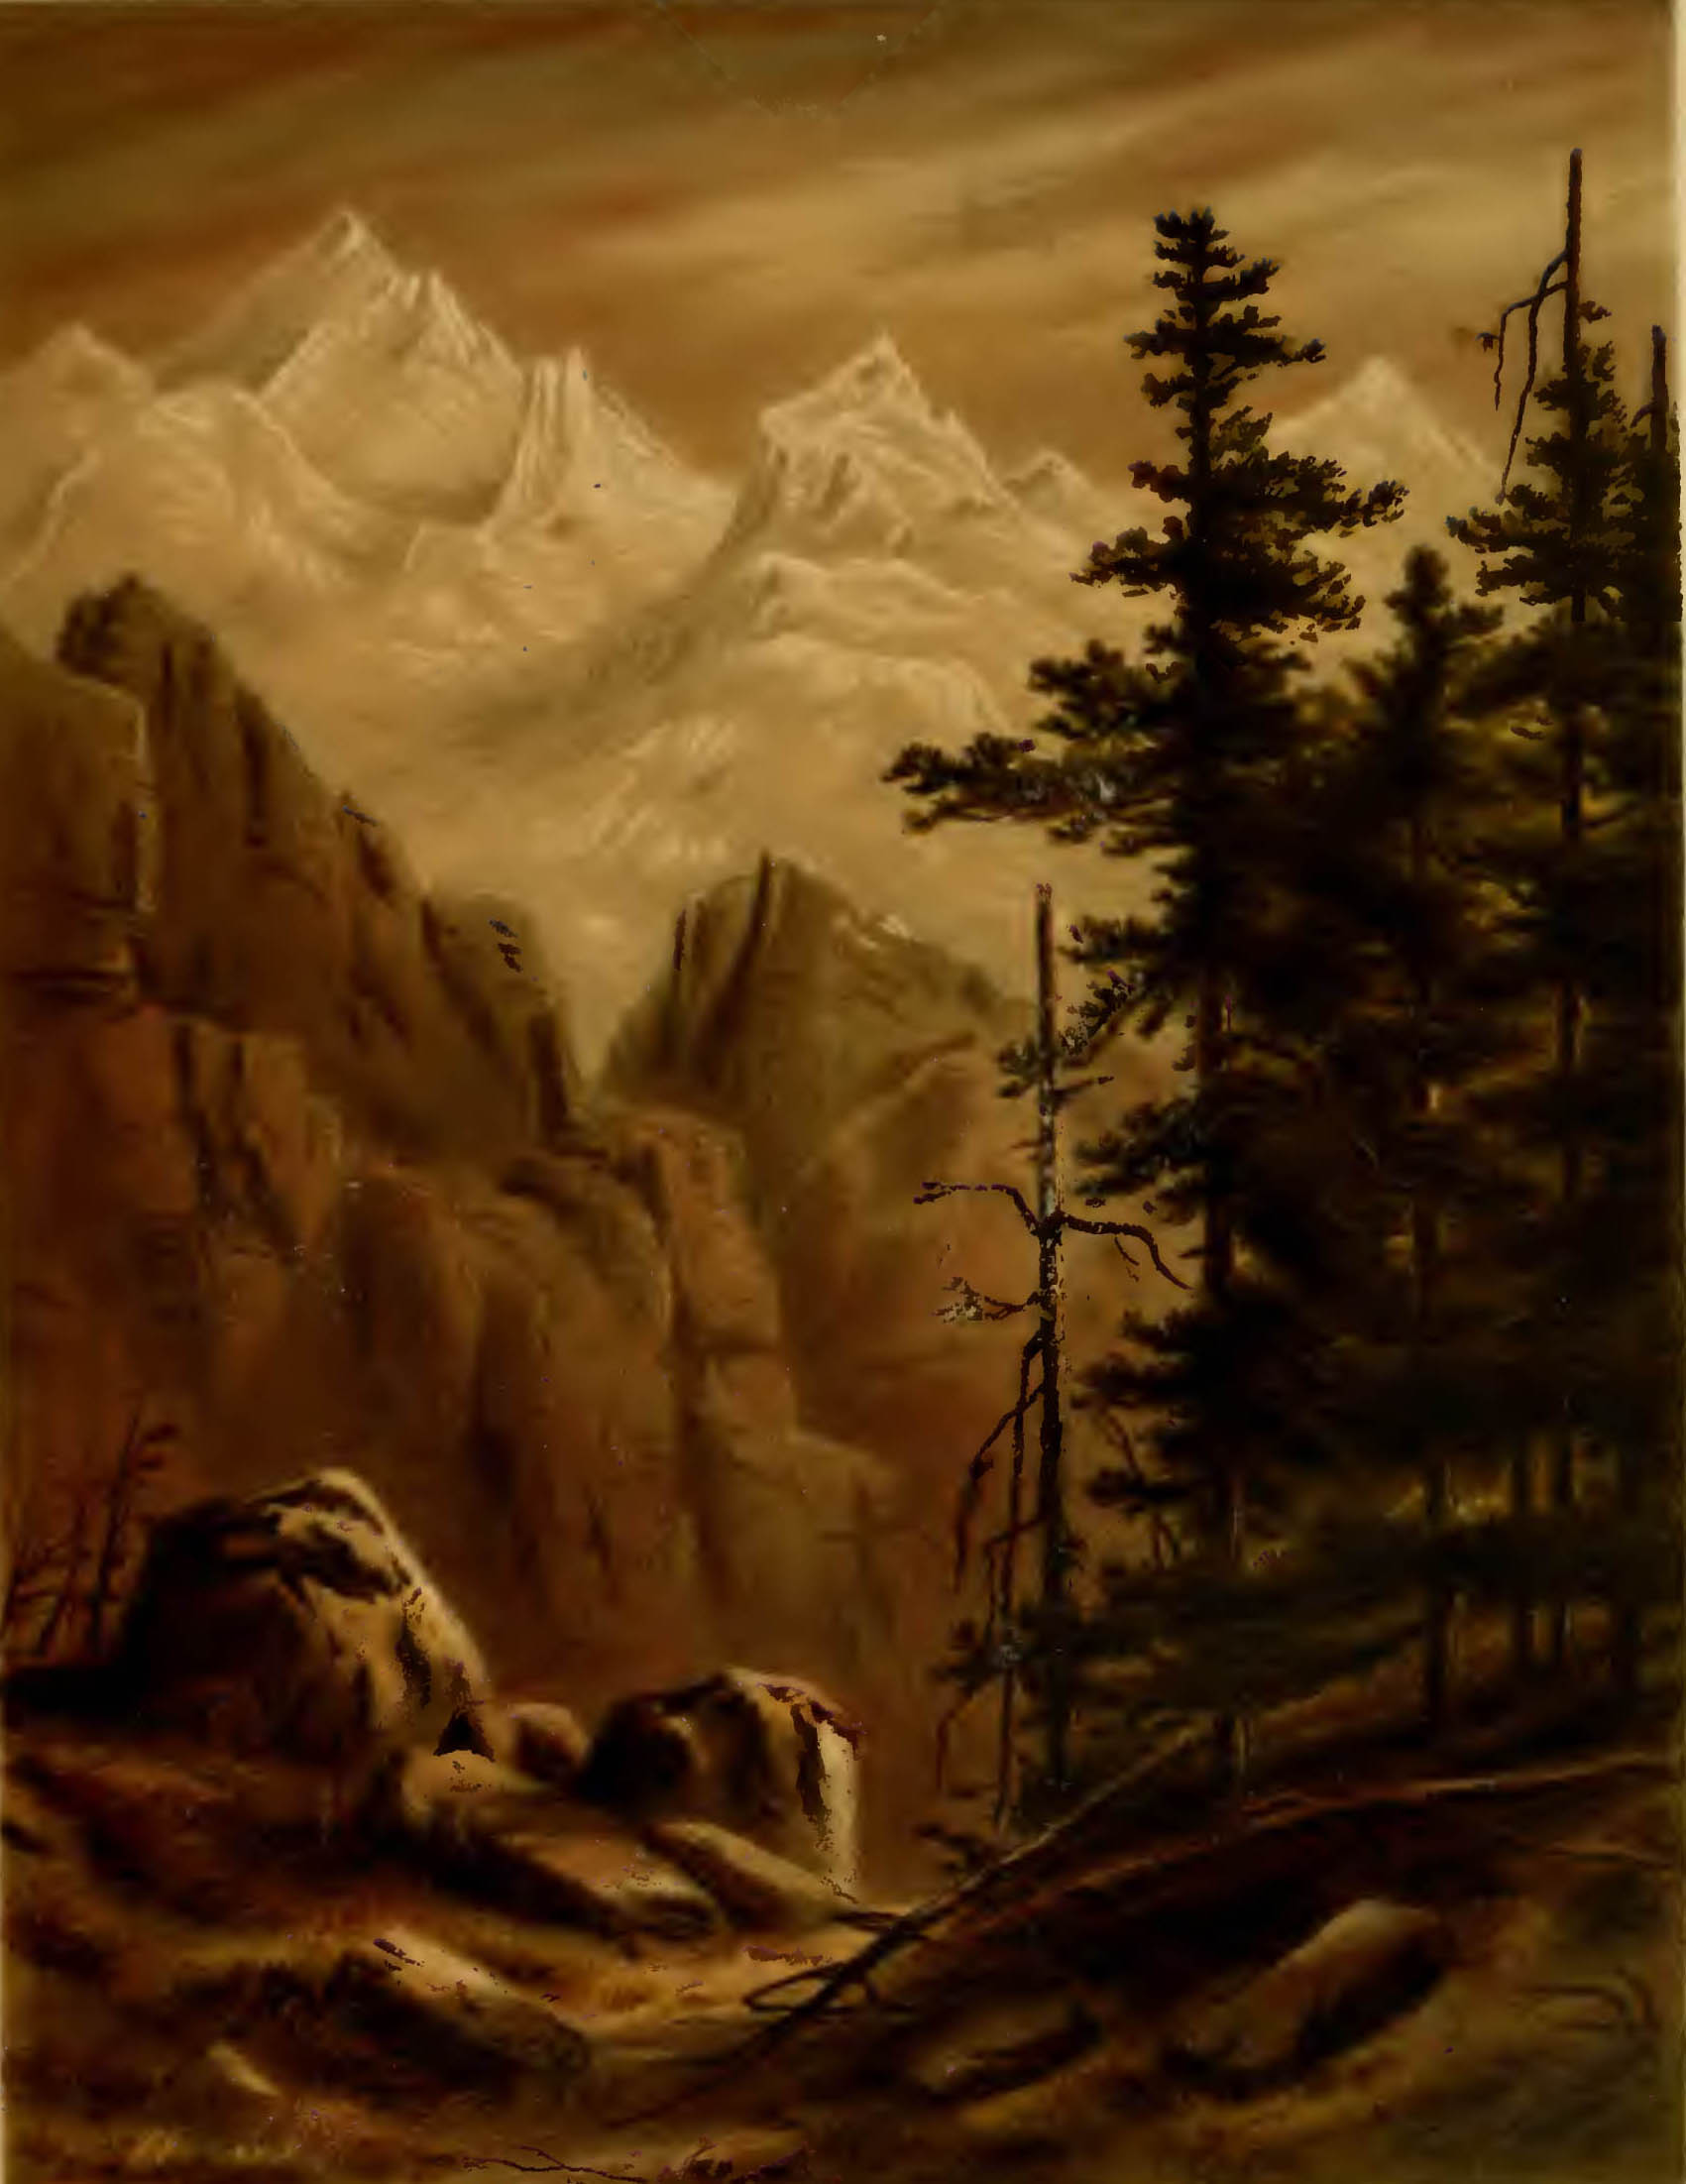 snow-capped mountains and evergreen trees, caption: Kinchinjunga and Pundeem, by Moonlight